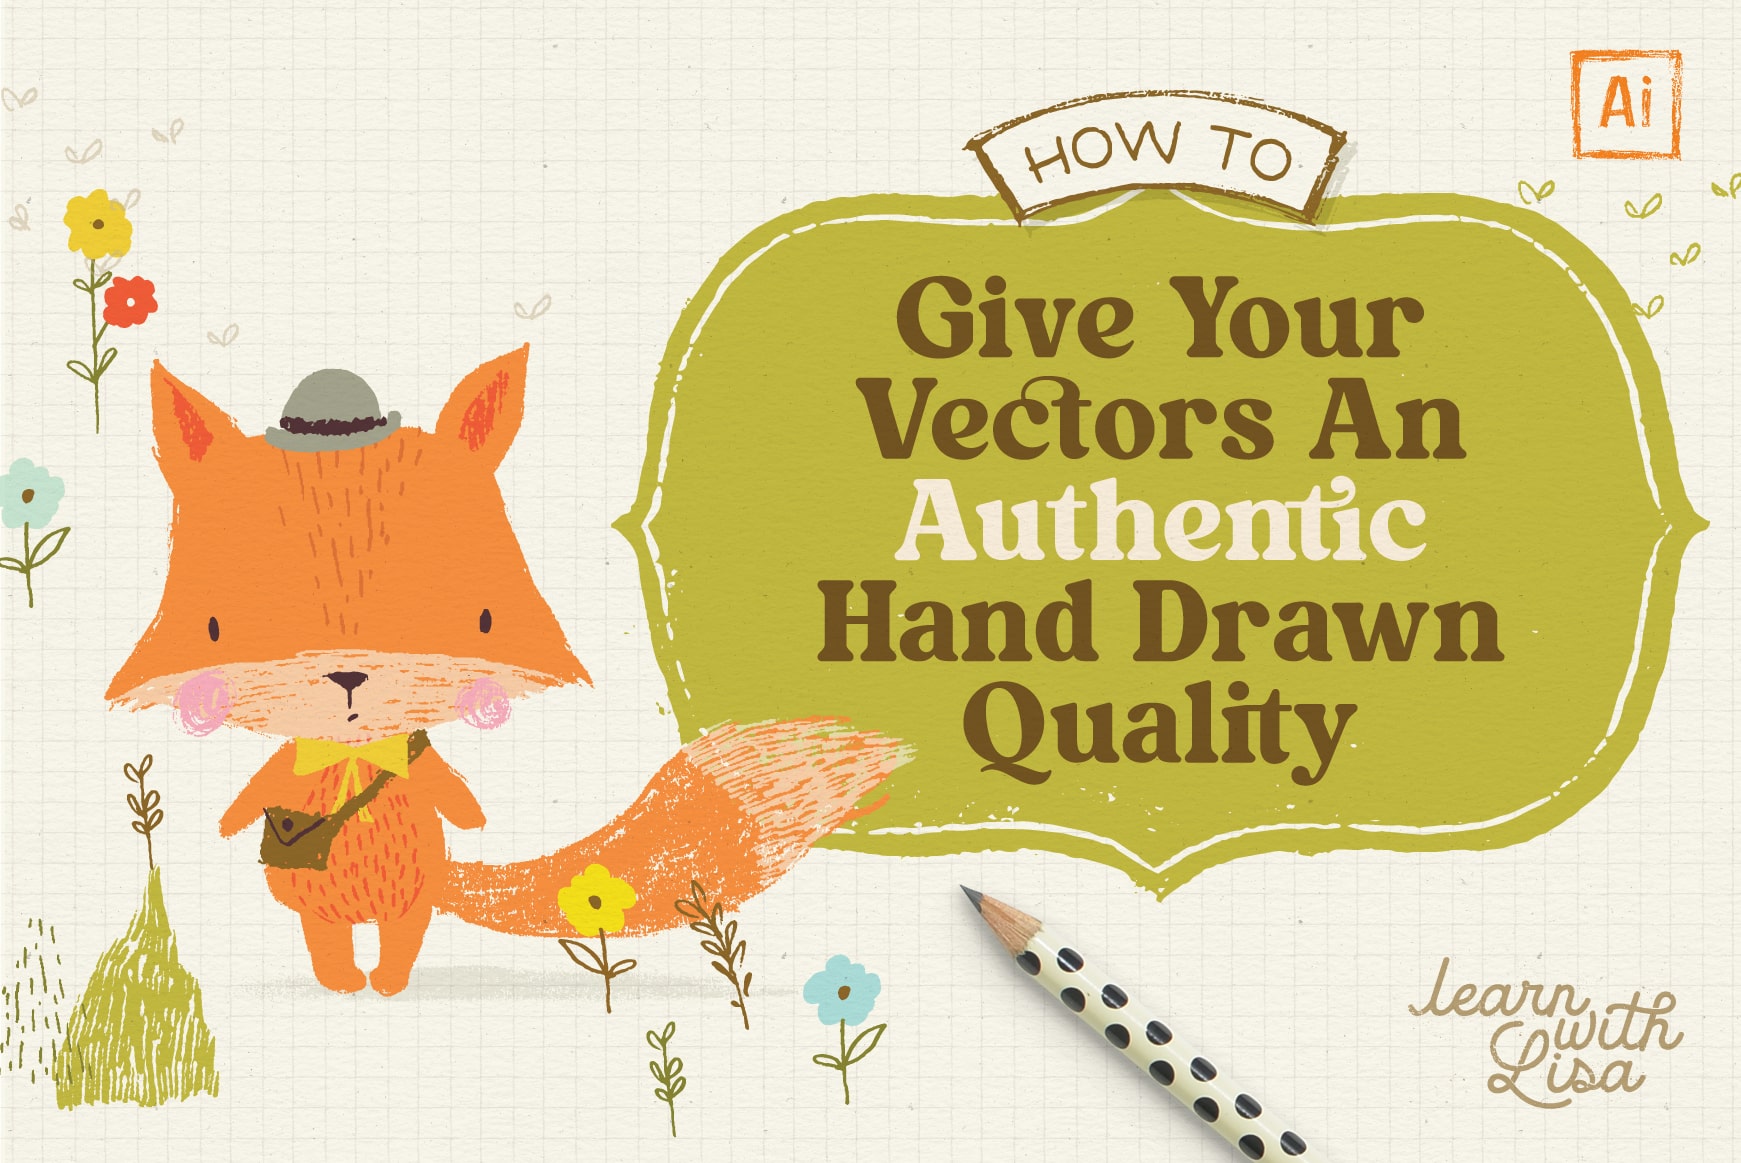 Adobe Illustrator: How to retain a hand drawn look to your vector graphics